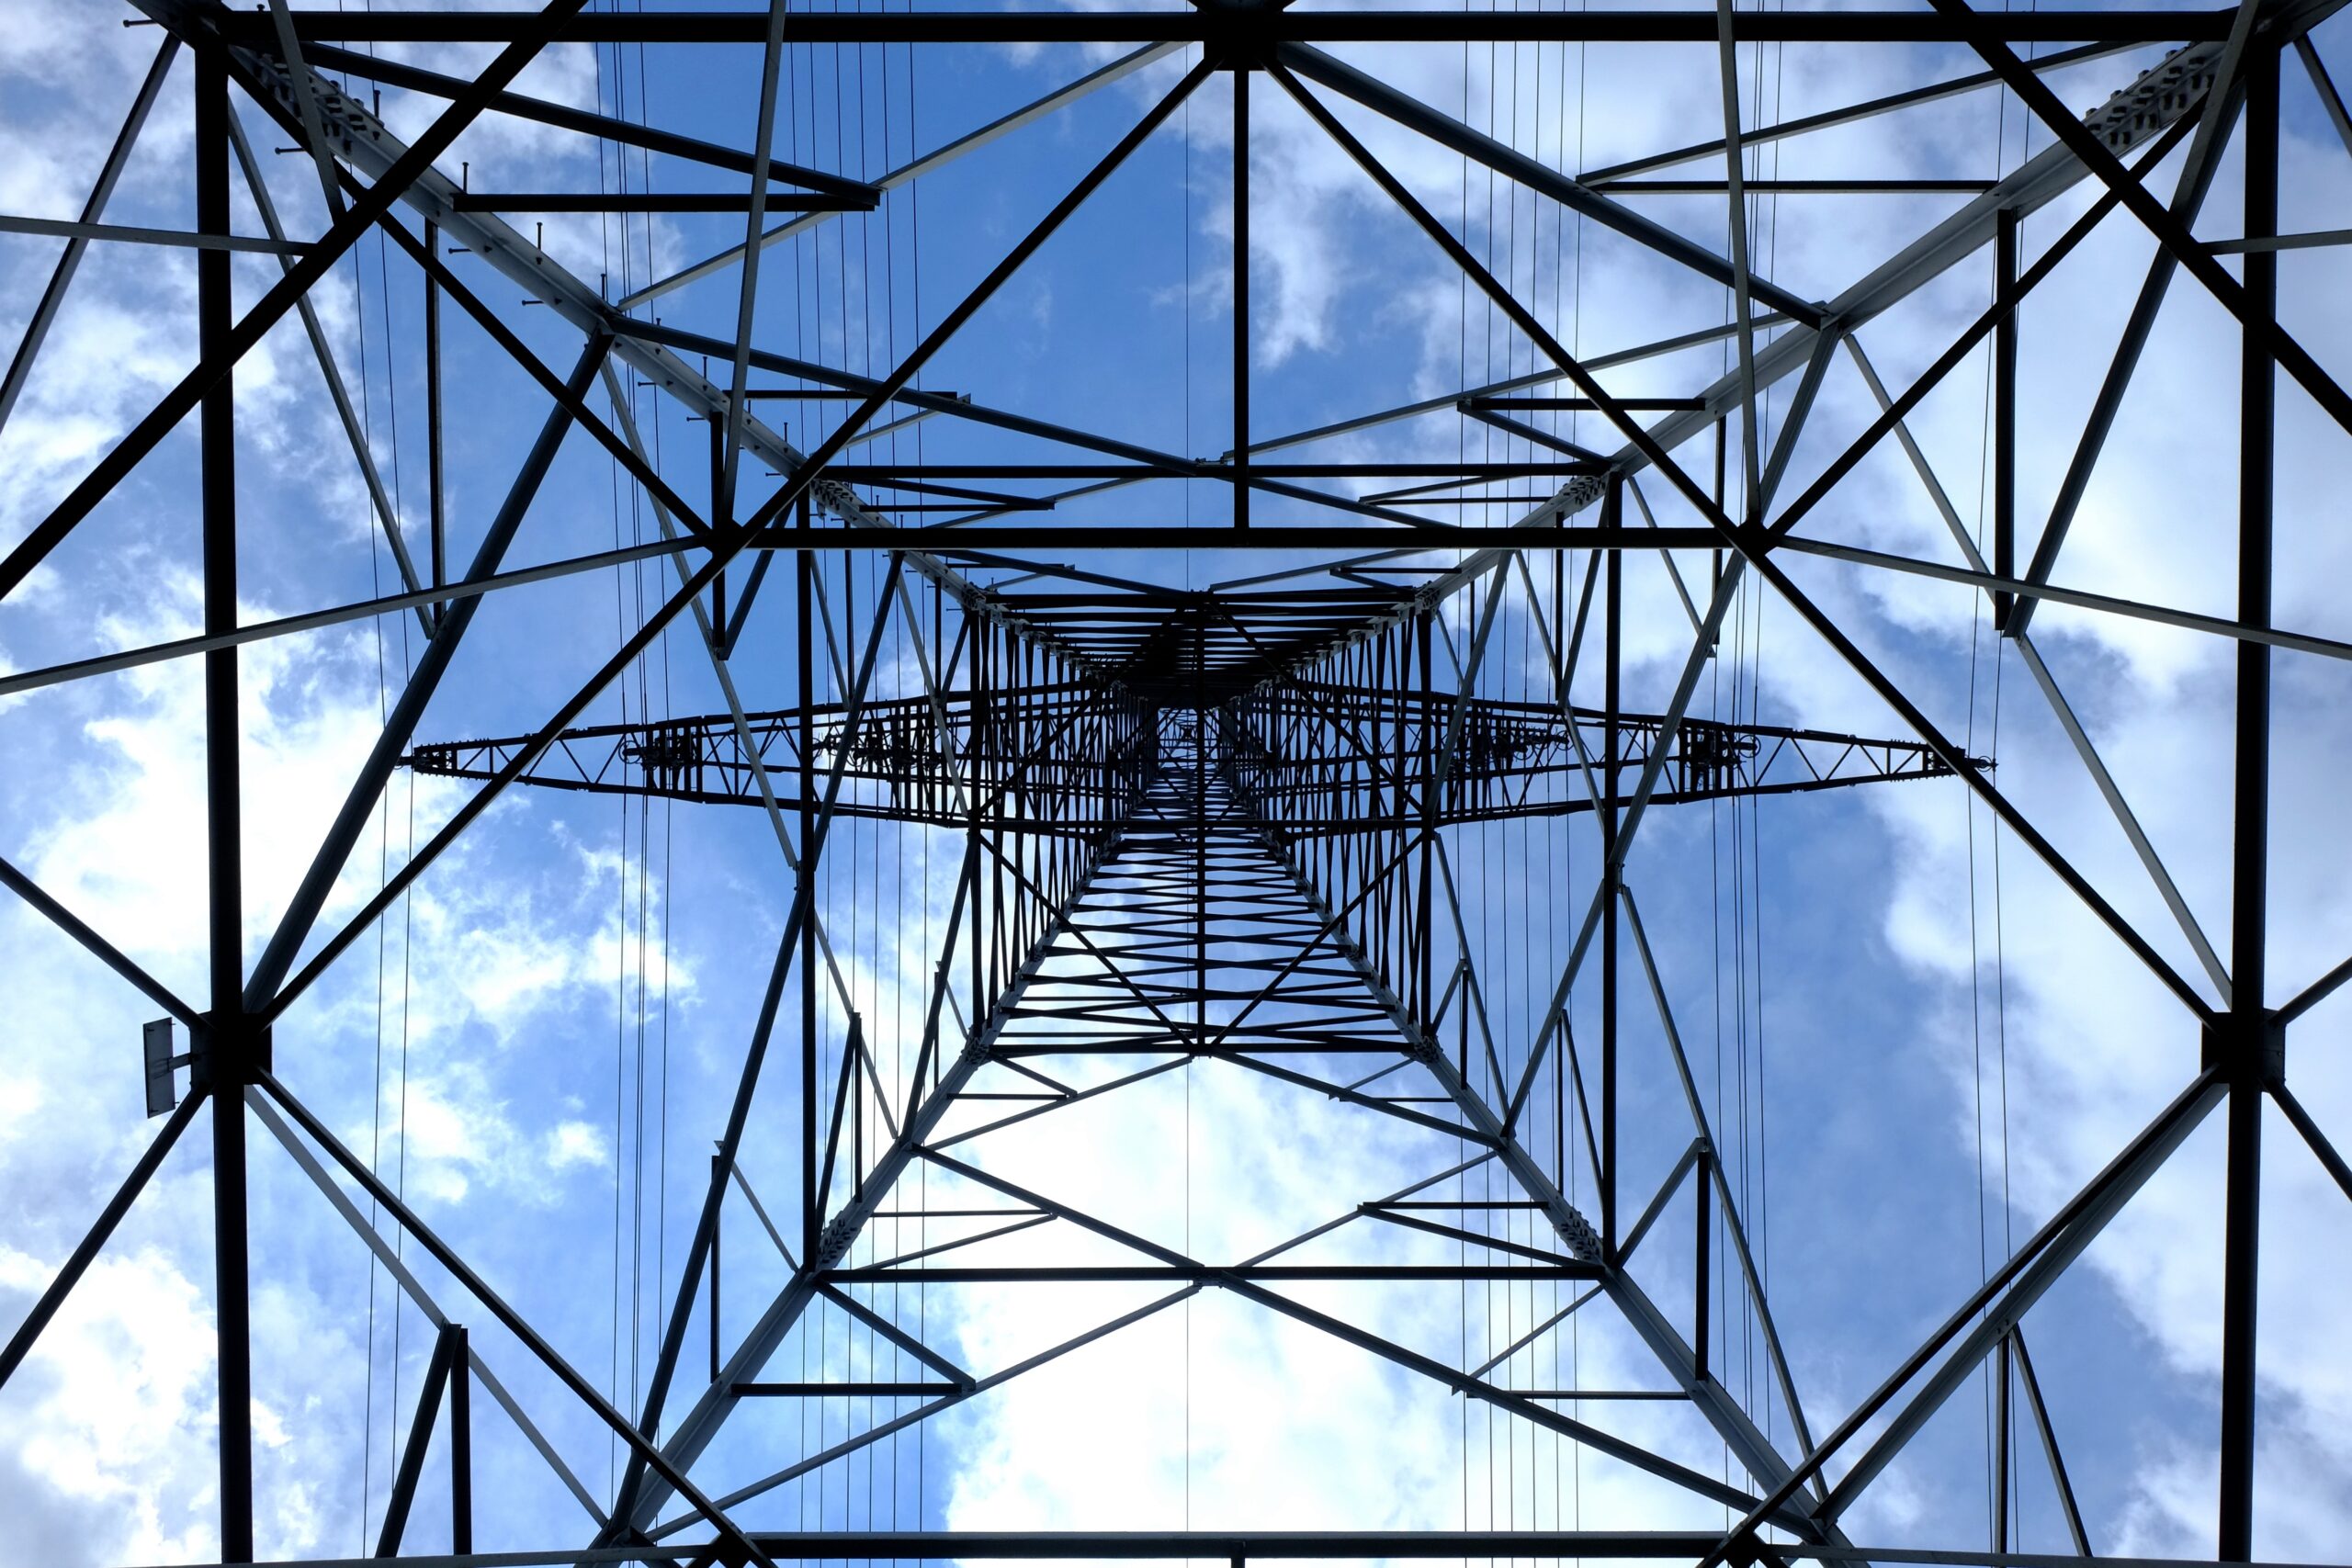 Electricity Tower